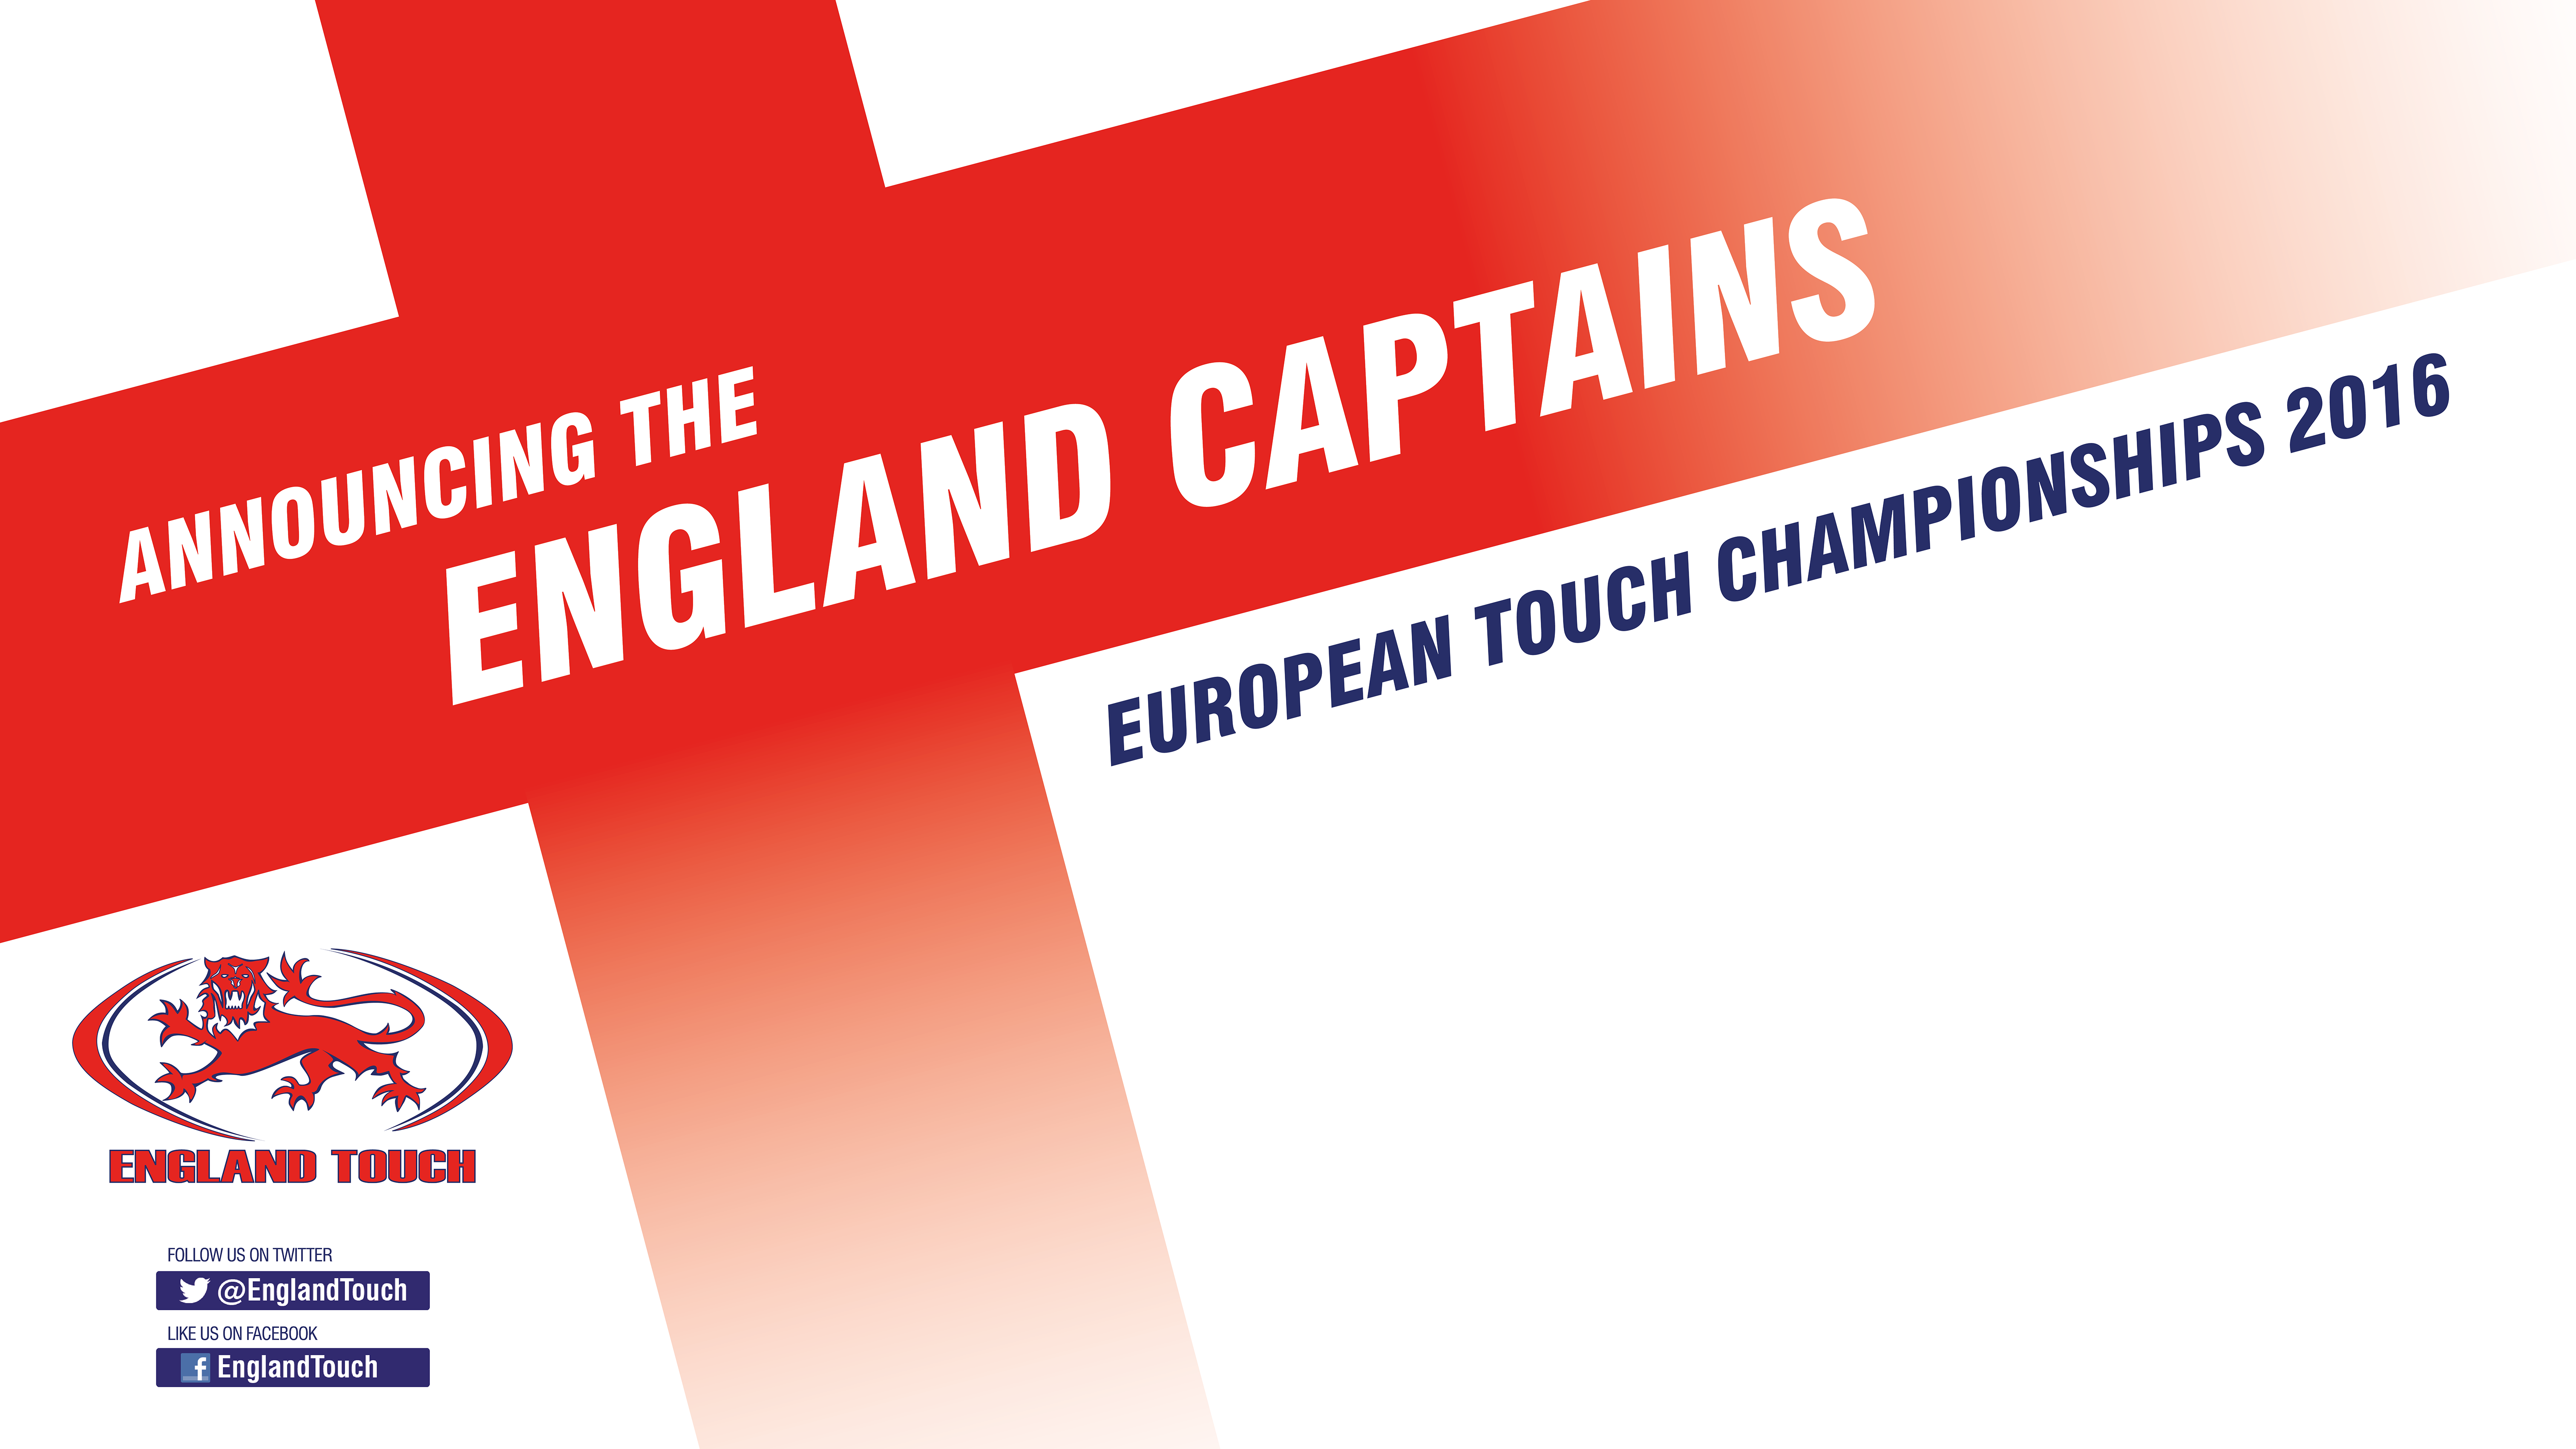 England Captains and Vice Captains Announced for 2016 European Touch Championships